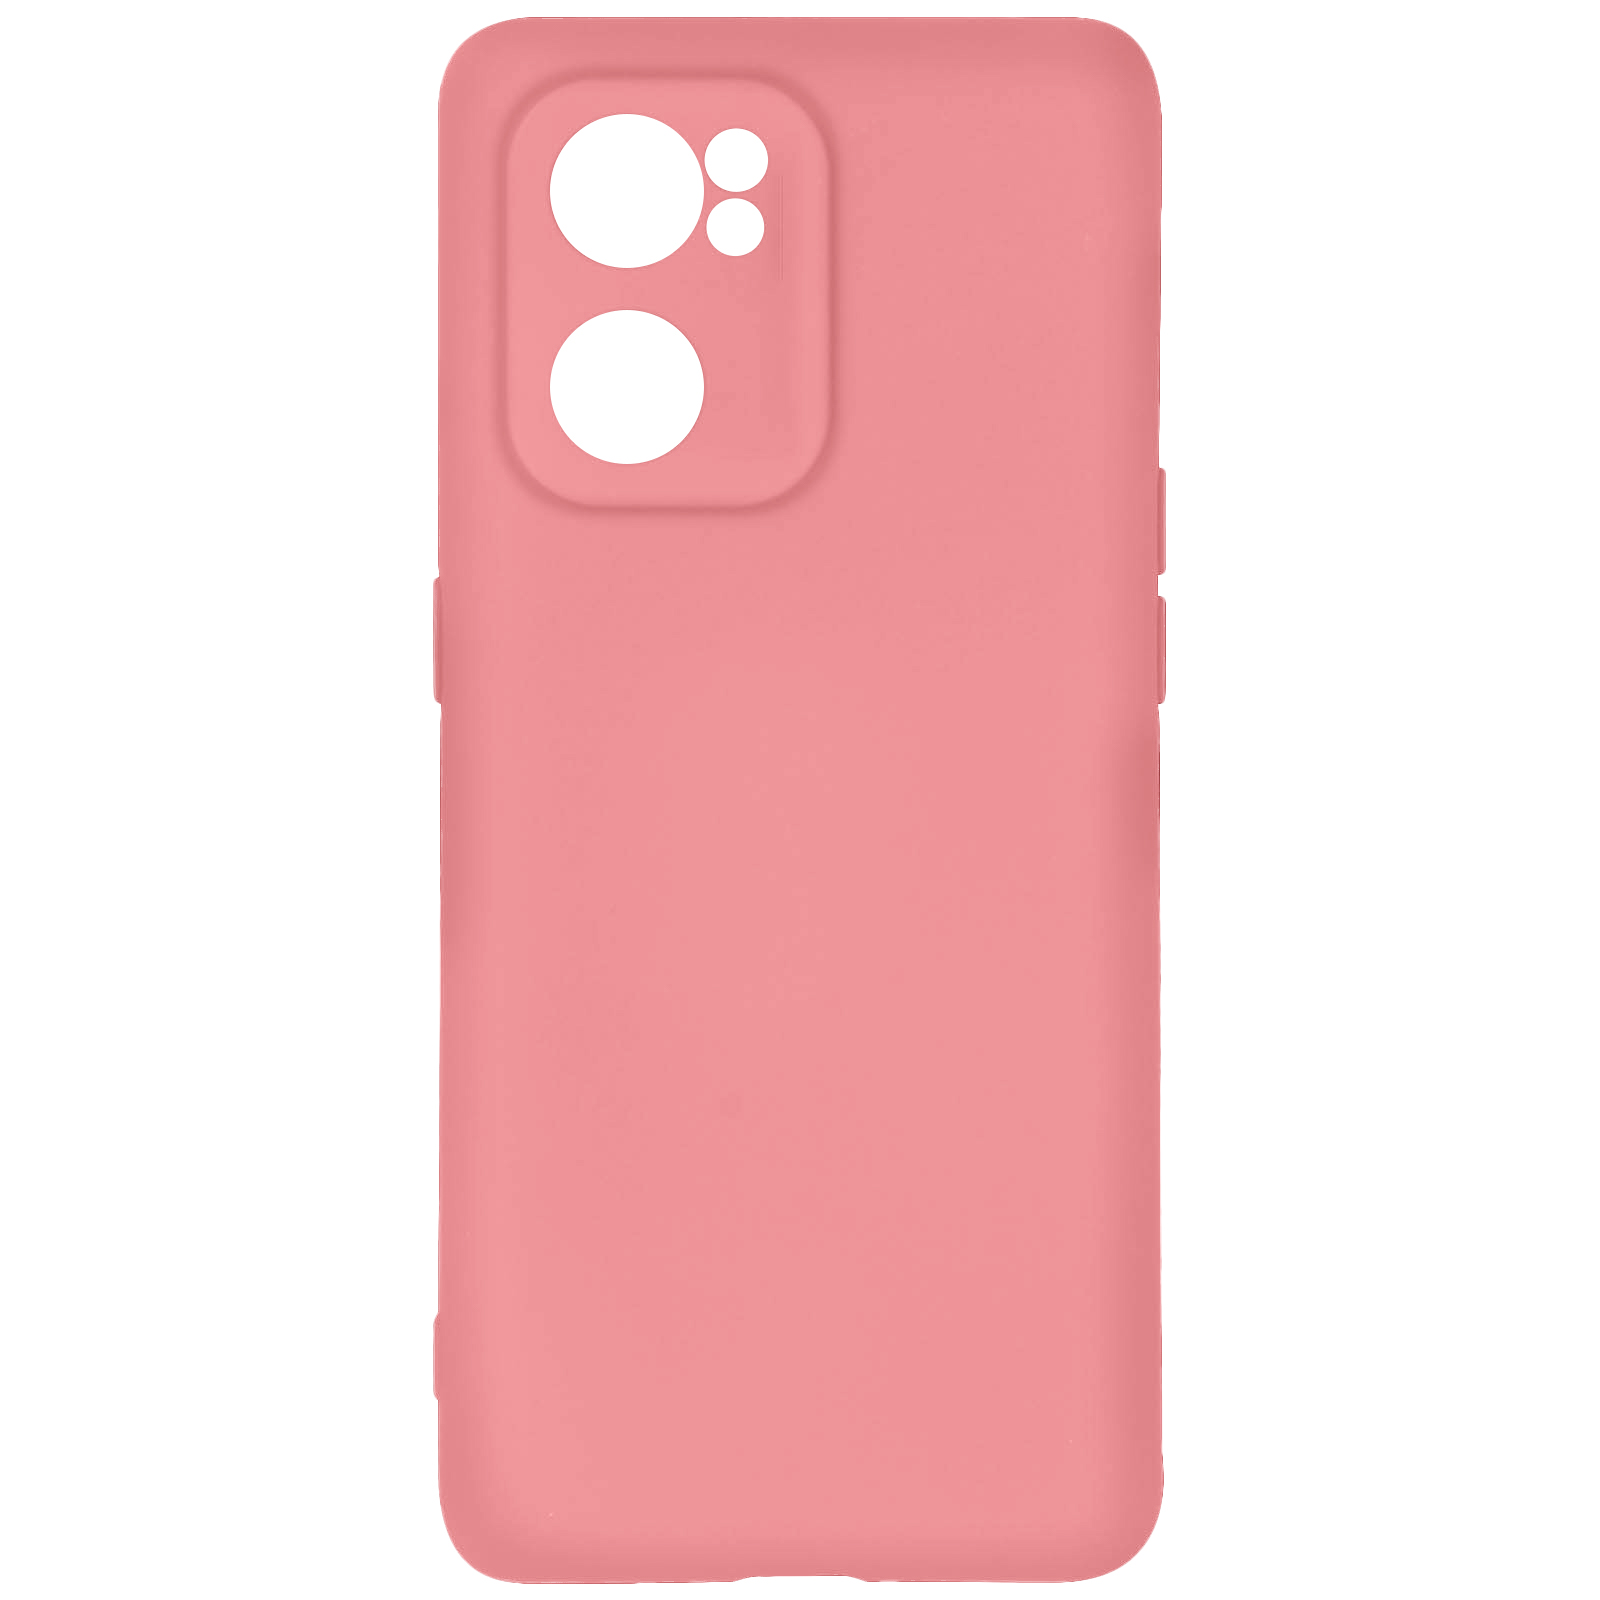 AVIZAR Soft Touch Rosa lite, Find Oppo, Backcover, X5 Handyhülle Series